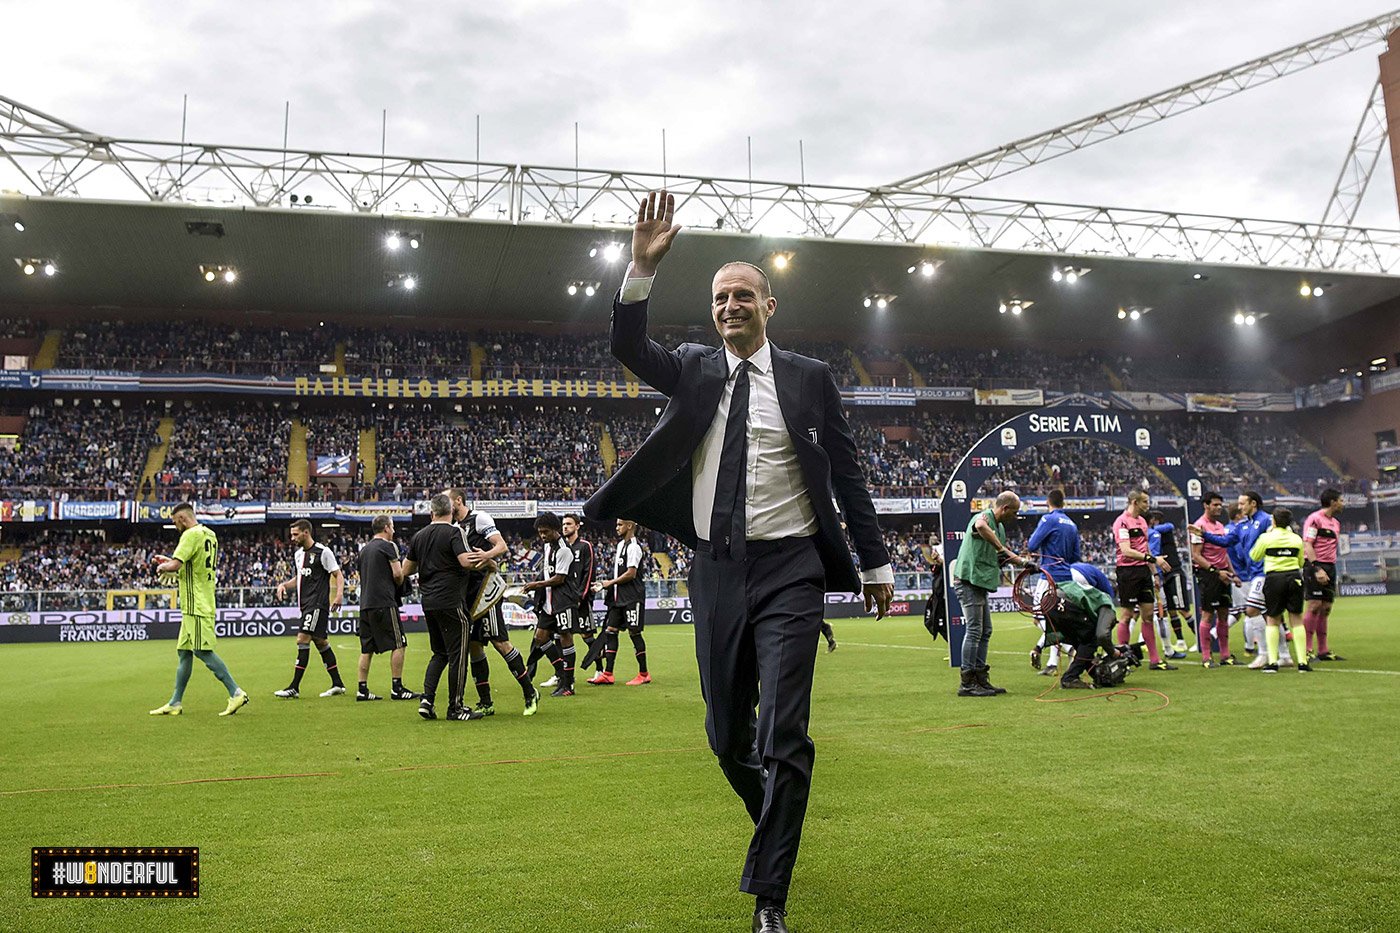 Allegri waves at the fans after winning his fifth Serie A title with Juventus